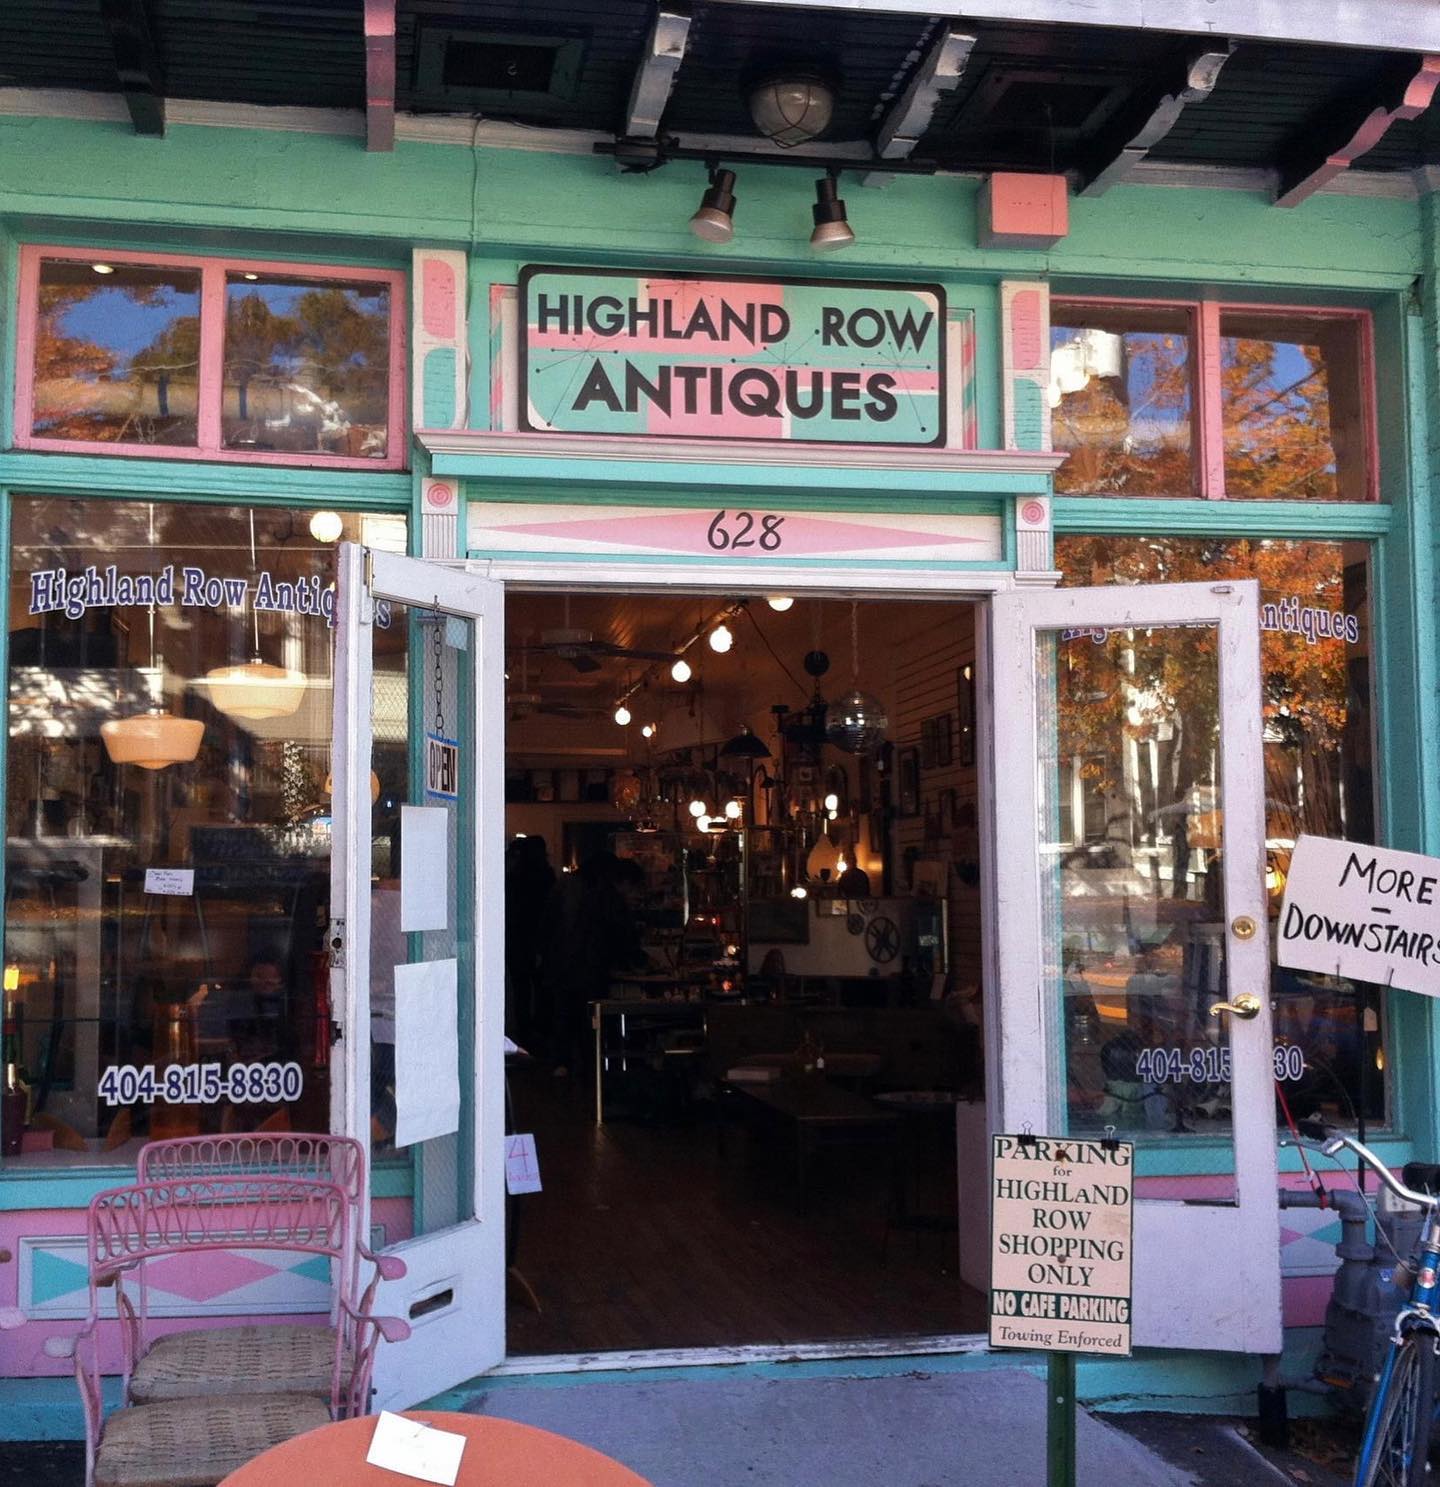 Highland Row Antiques Closing Citing 'Nearly 450%' Rent Increase